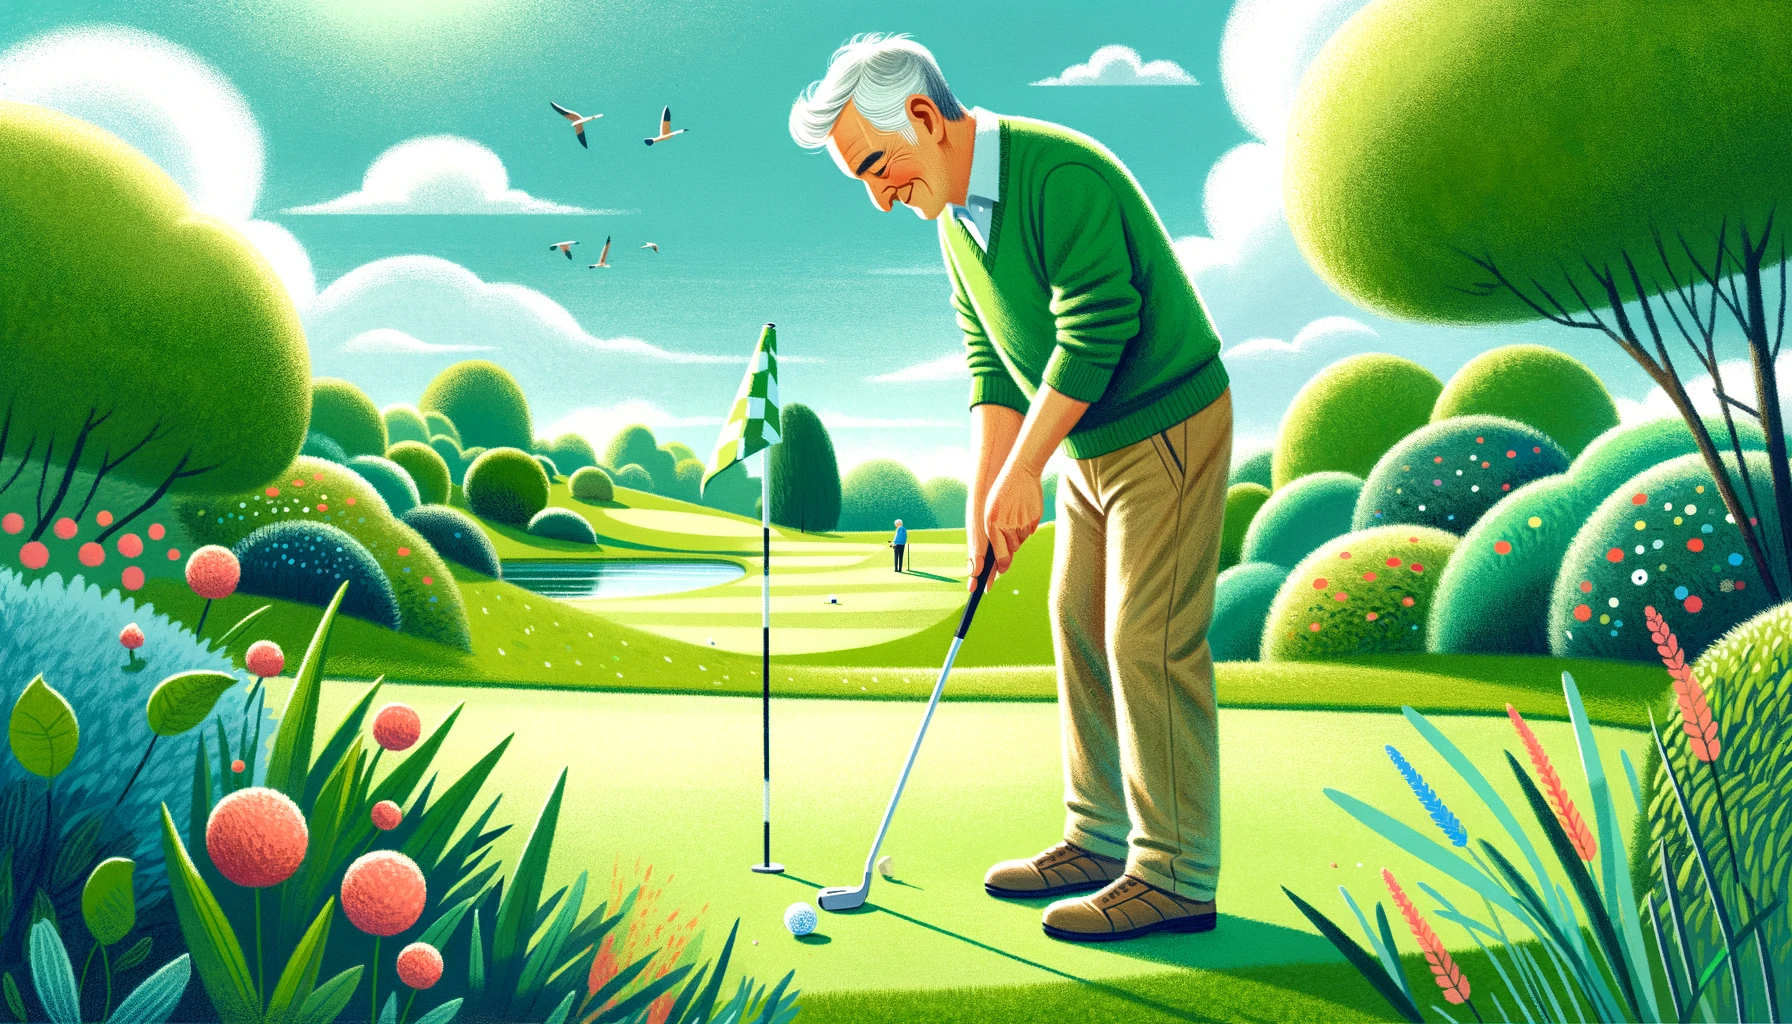 Golf: The Therapeutic Benefits of Golf to Improved Mental and Physical Well-Being